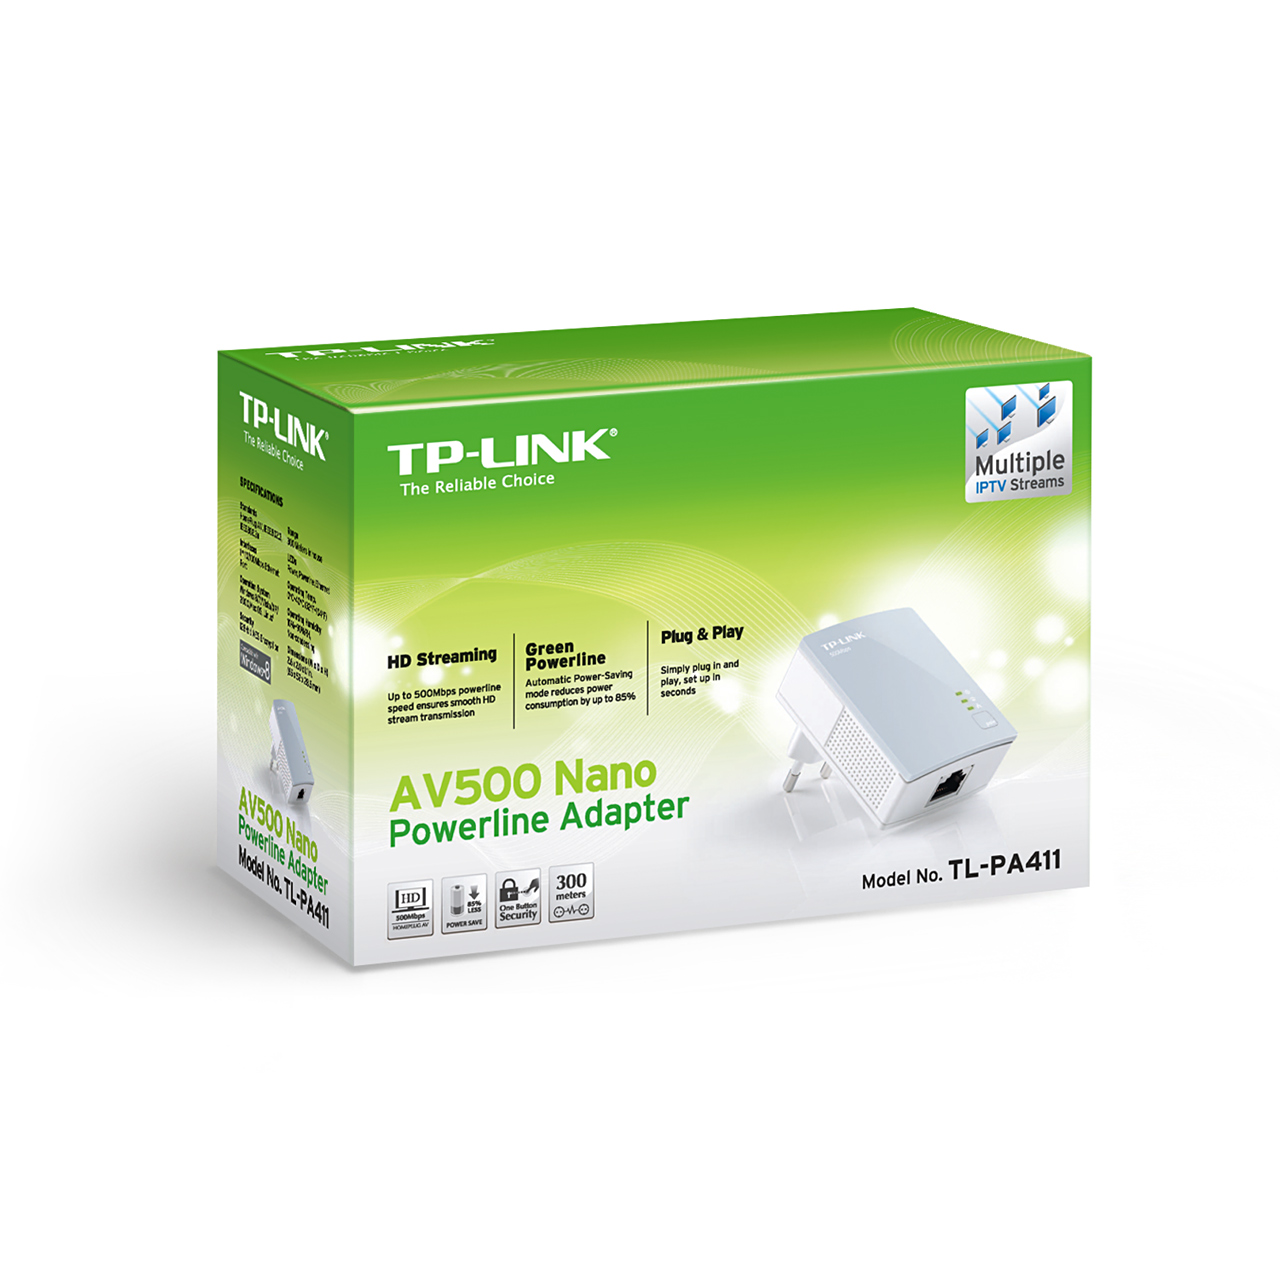 http://www.tp-link.com/resources/images/products/large/1280X1280_3_01.jpg